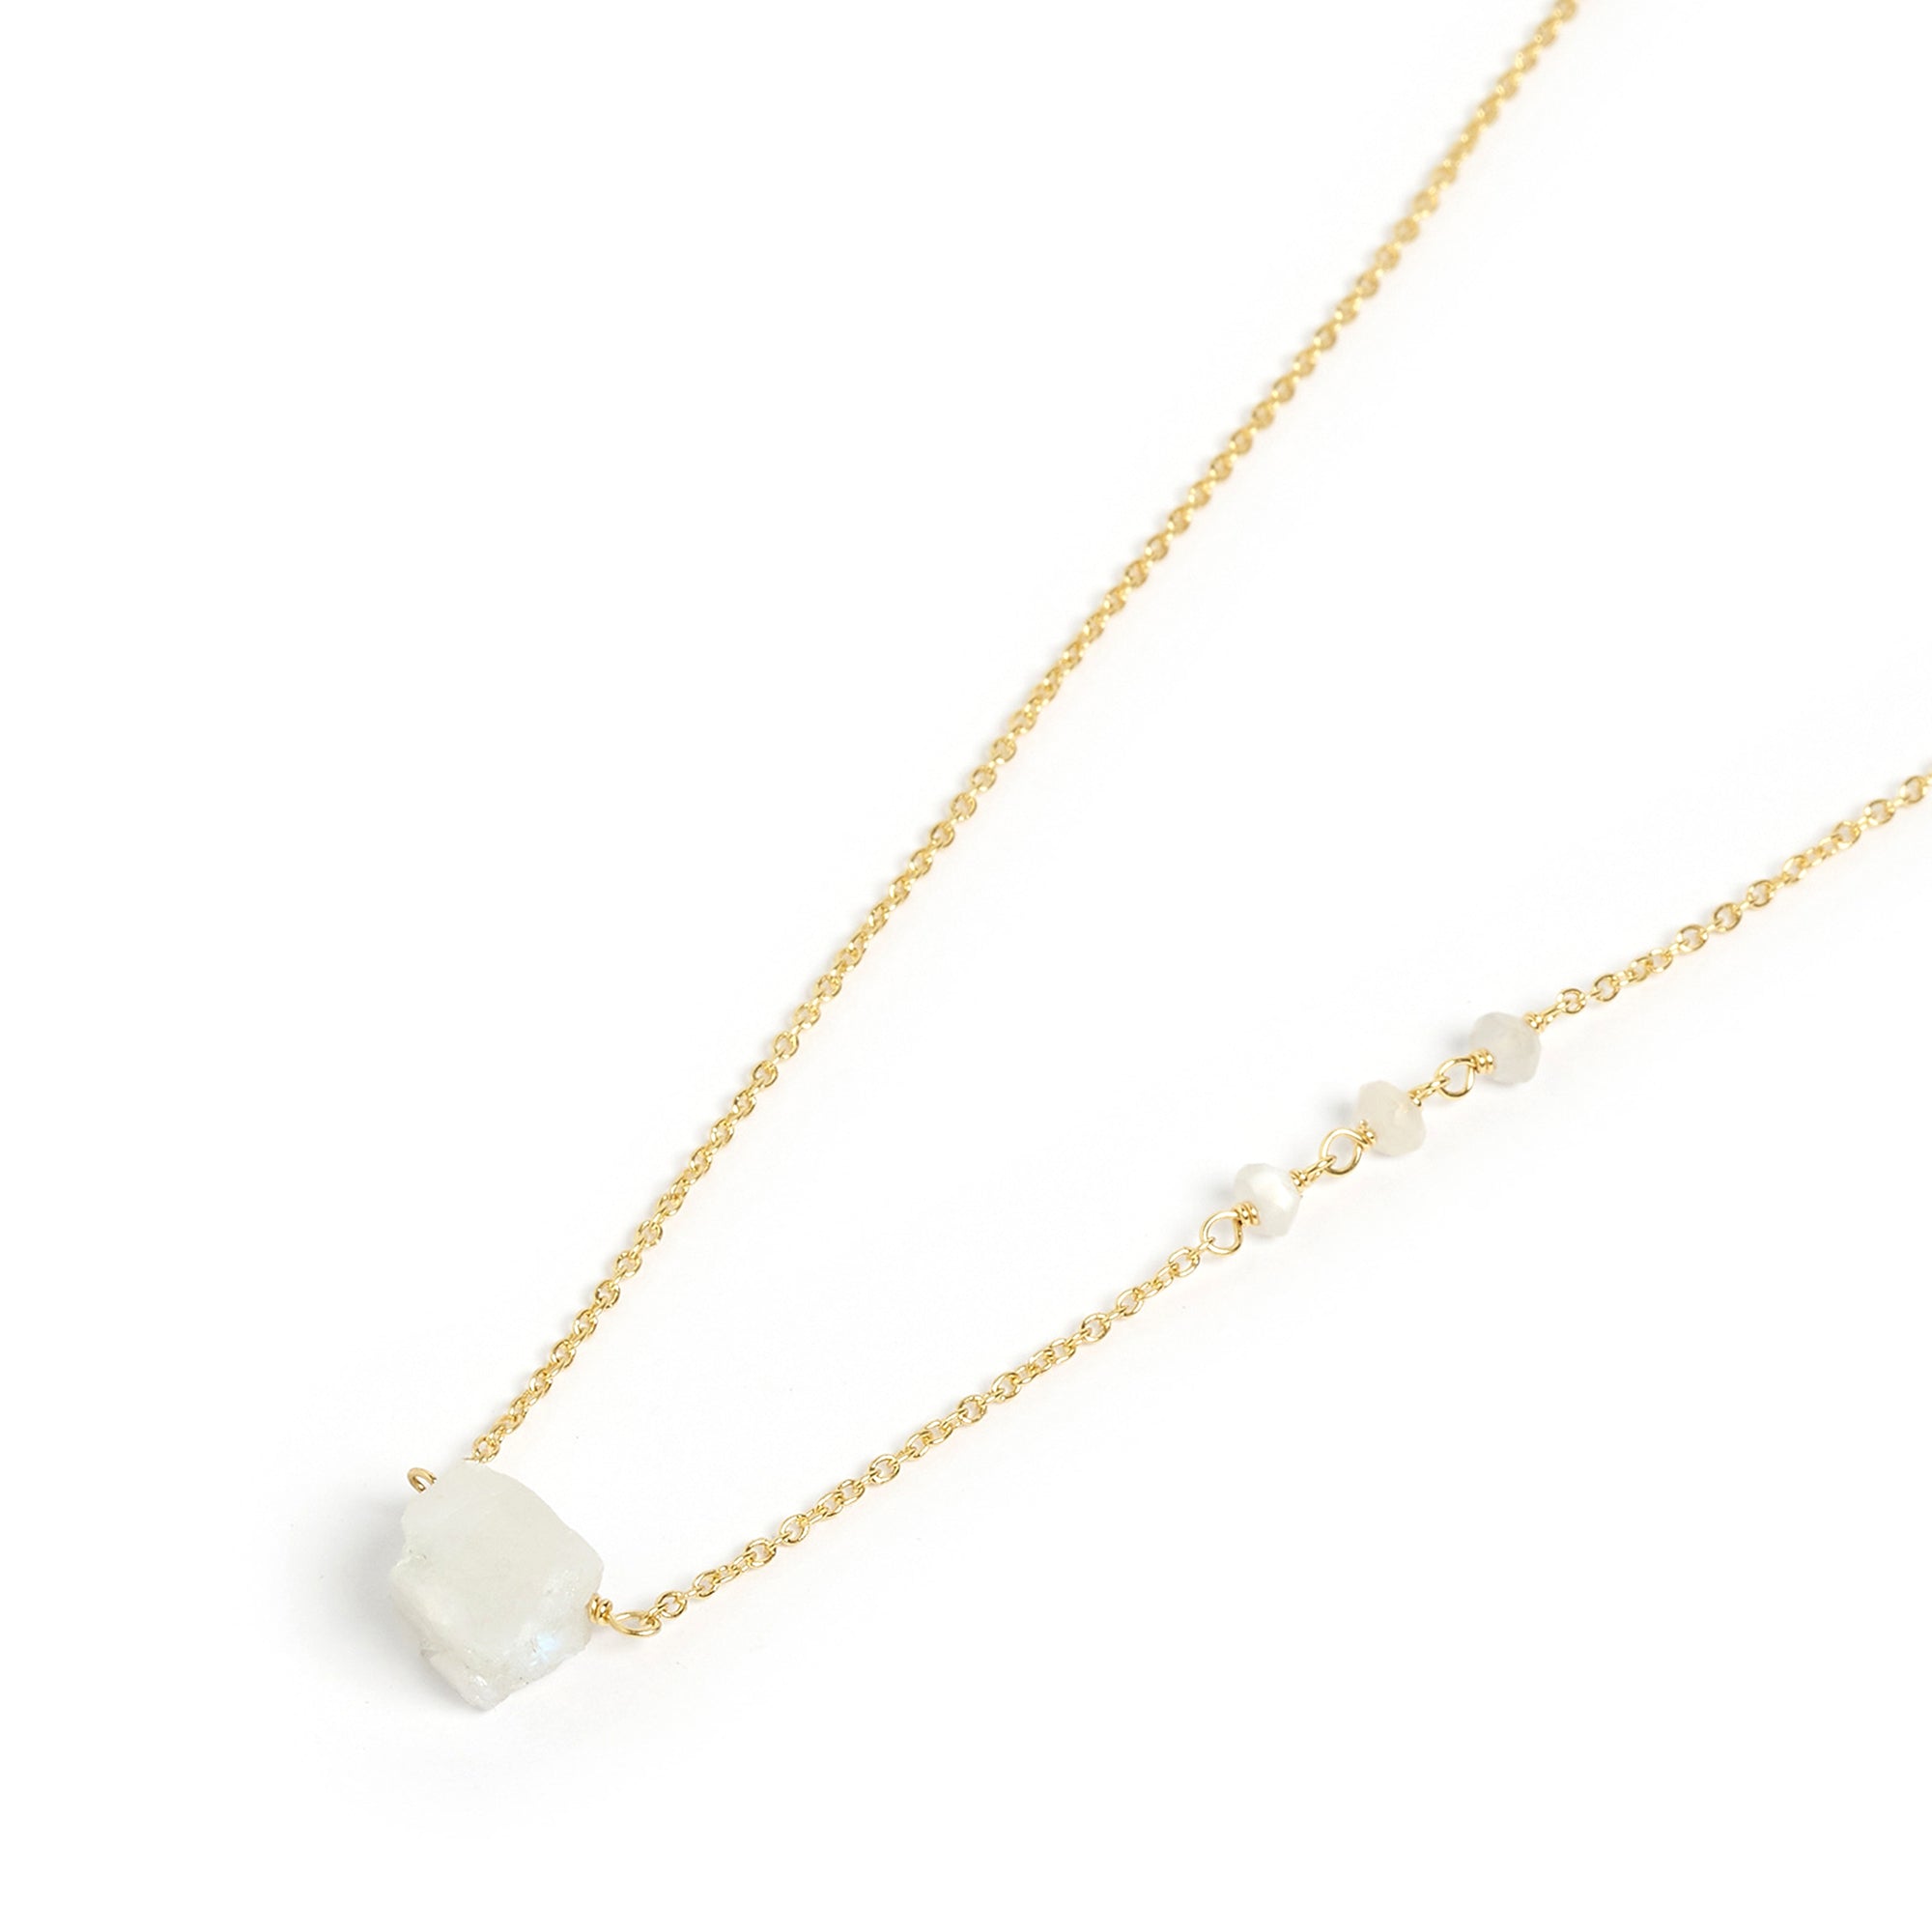 Arms Of Eve stunning Moonstone gold chain necklace with a white stone pendant